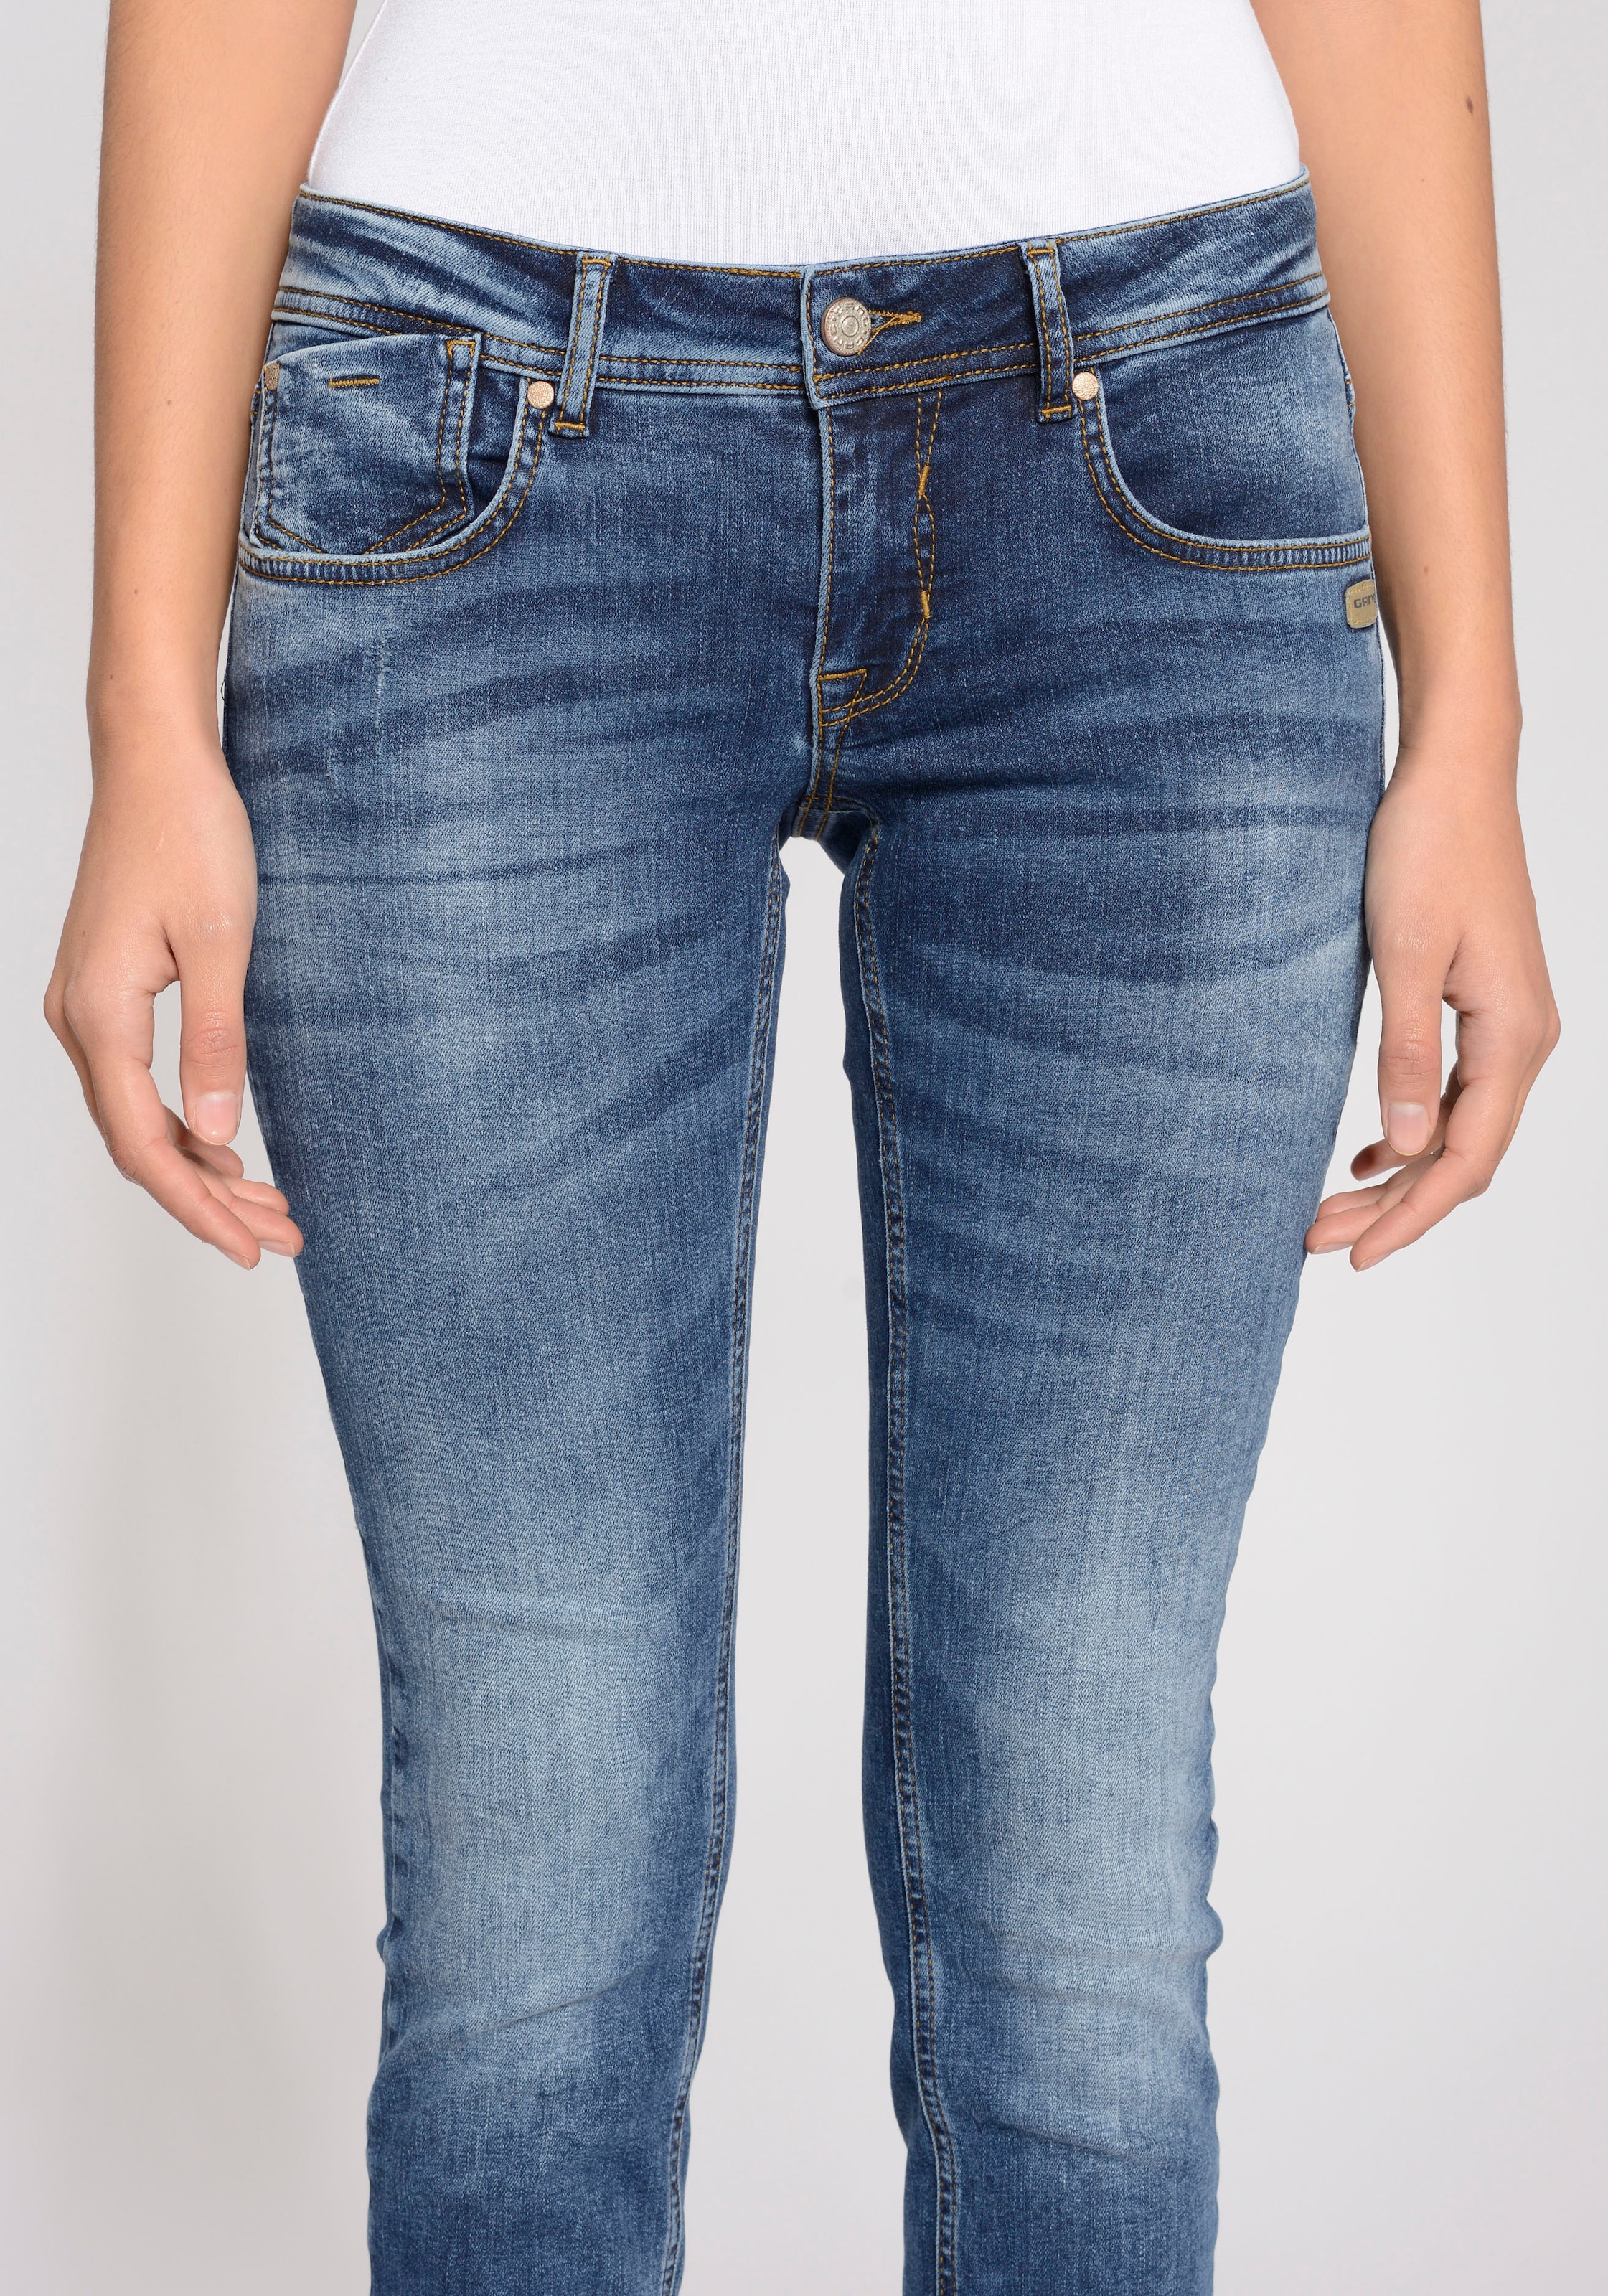 GANG Skinny-fit-Jeans »94 Faye bei ♕ Cropped«